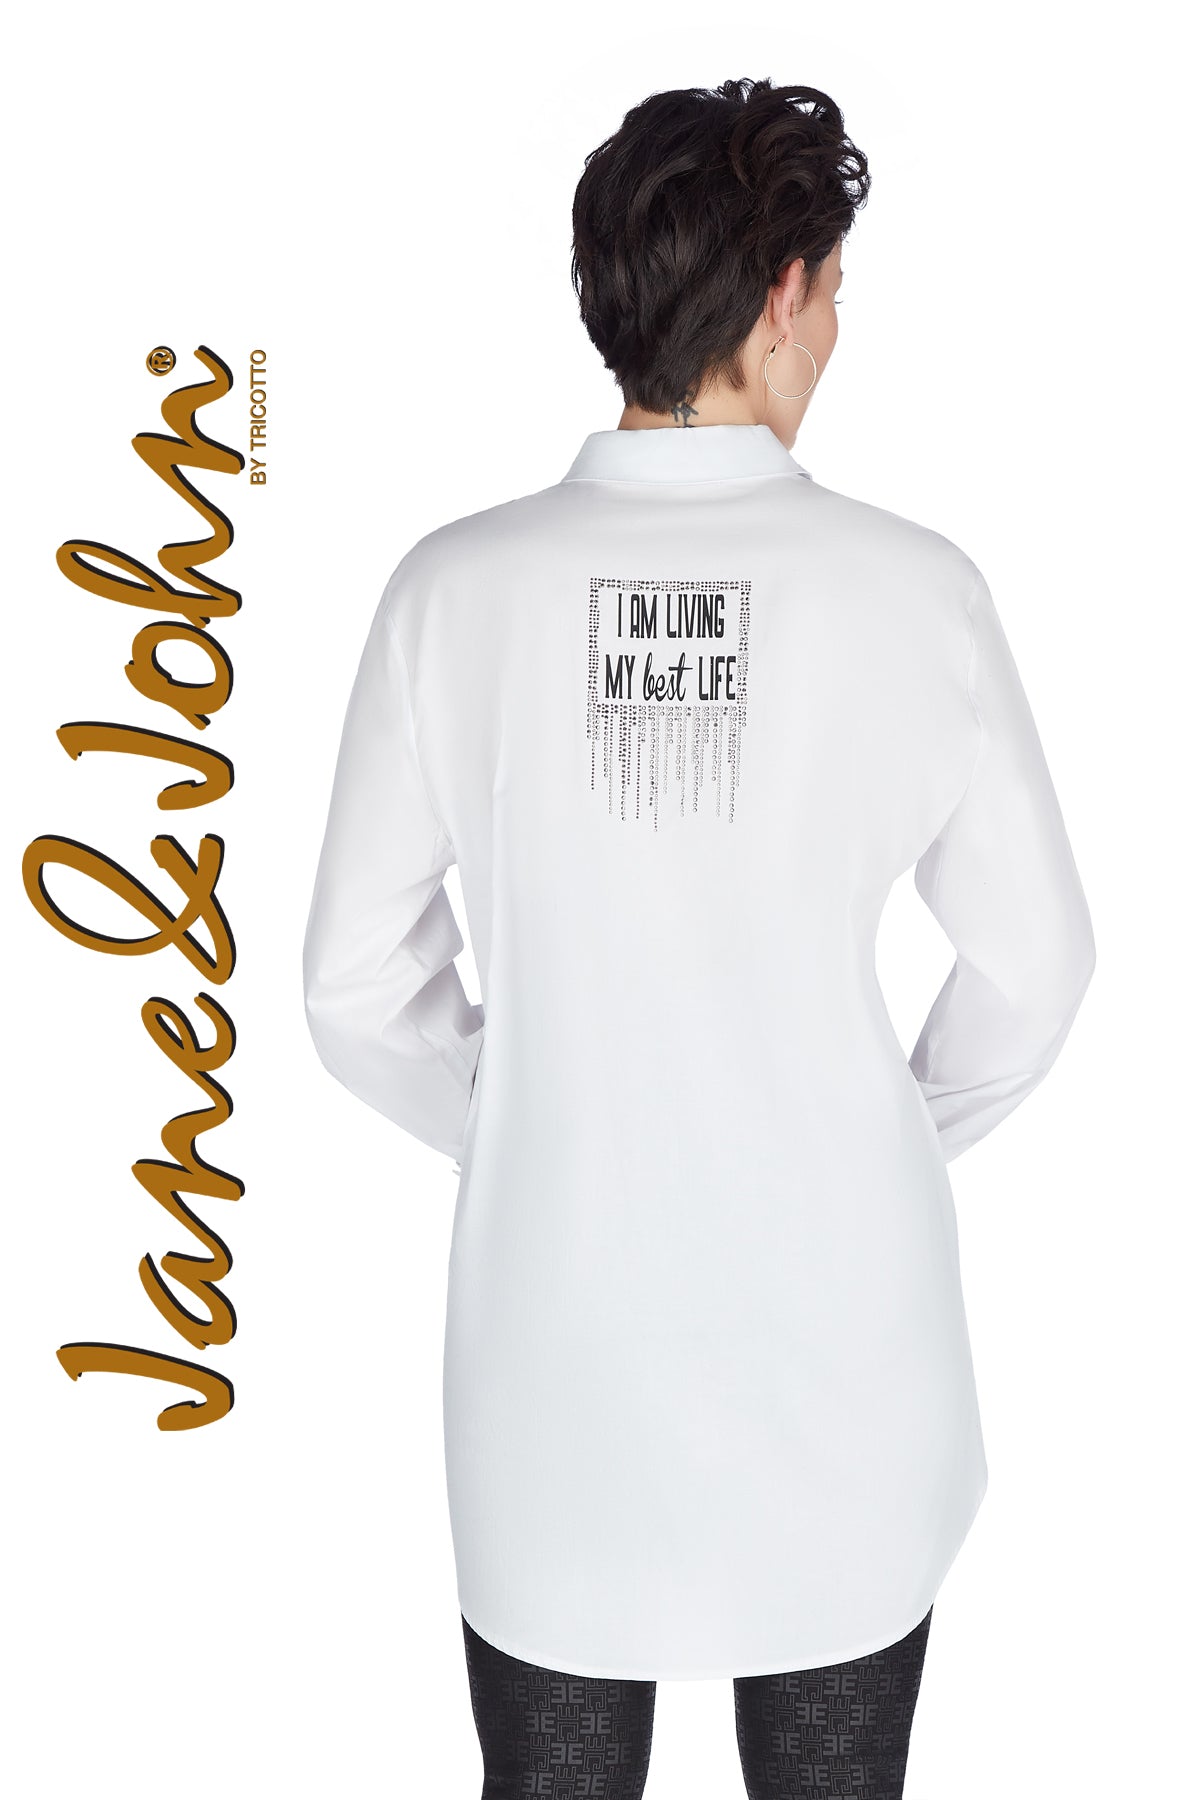 Tricotto White Blouses-Buy Tricotto Clothing Online-Women's White Blouses-Jane & John Clothing Montreal-Tricotto Fall 2022 Collection